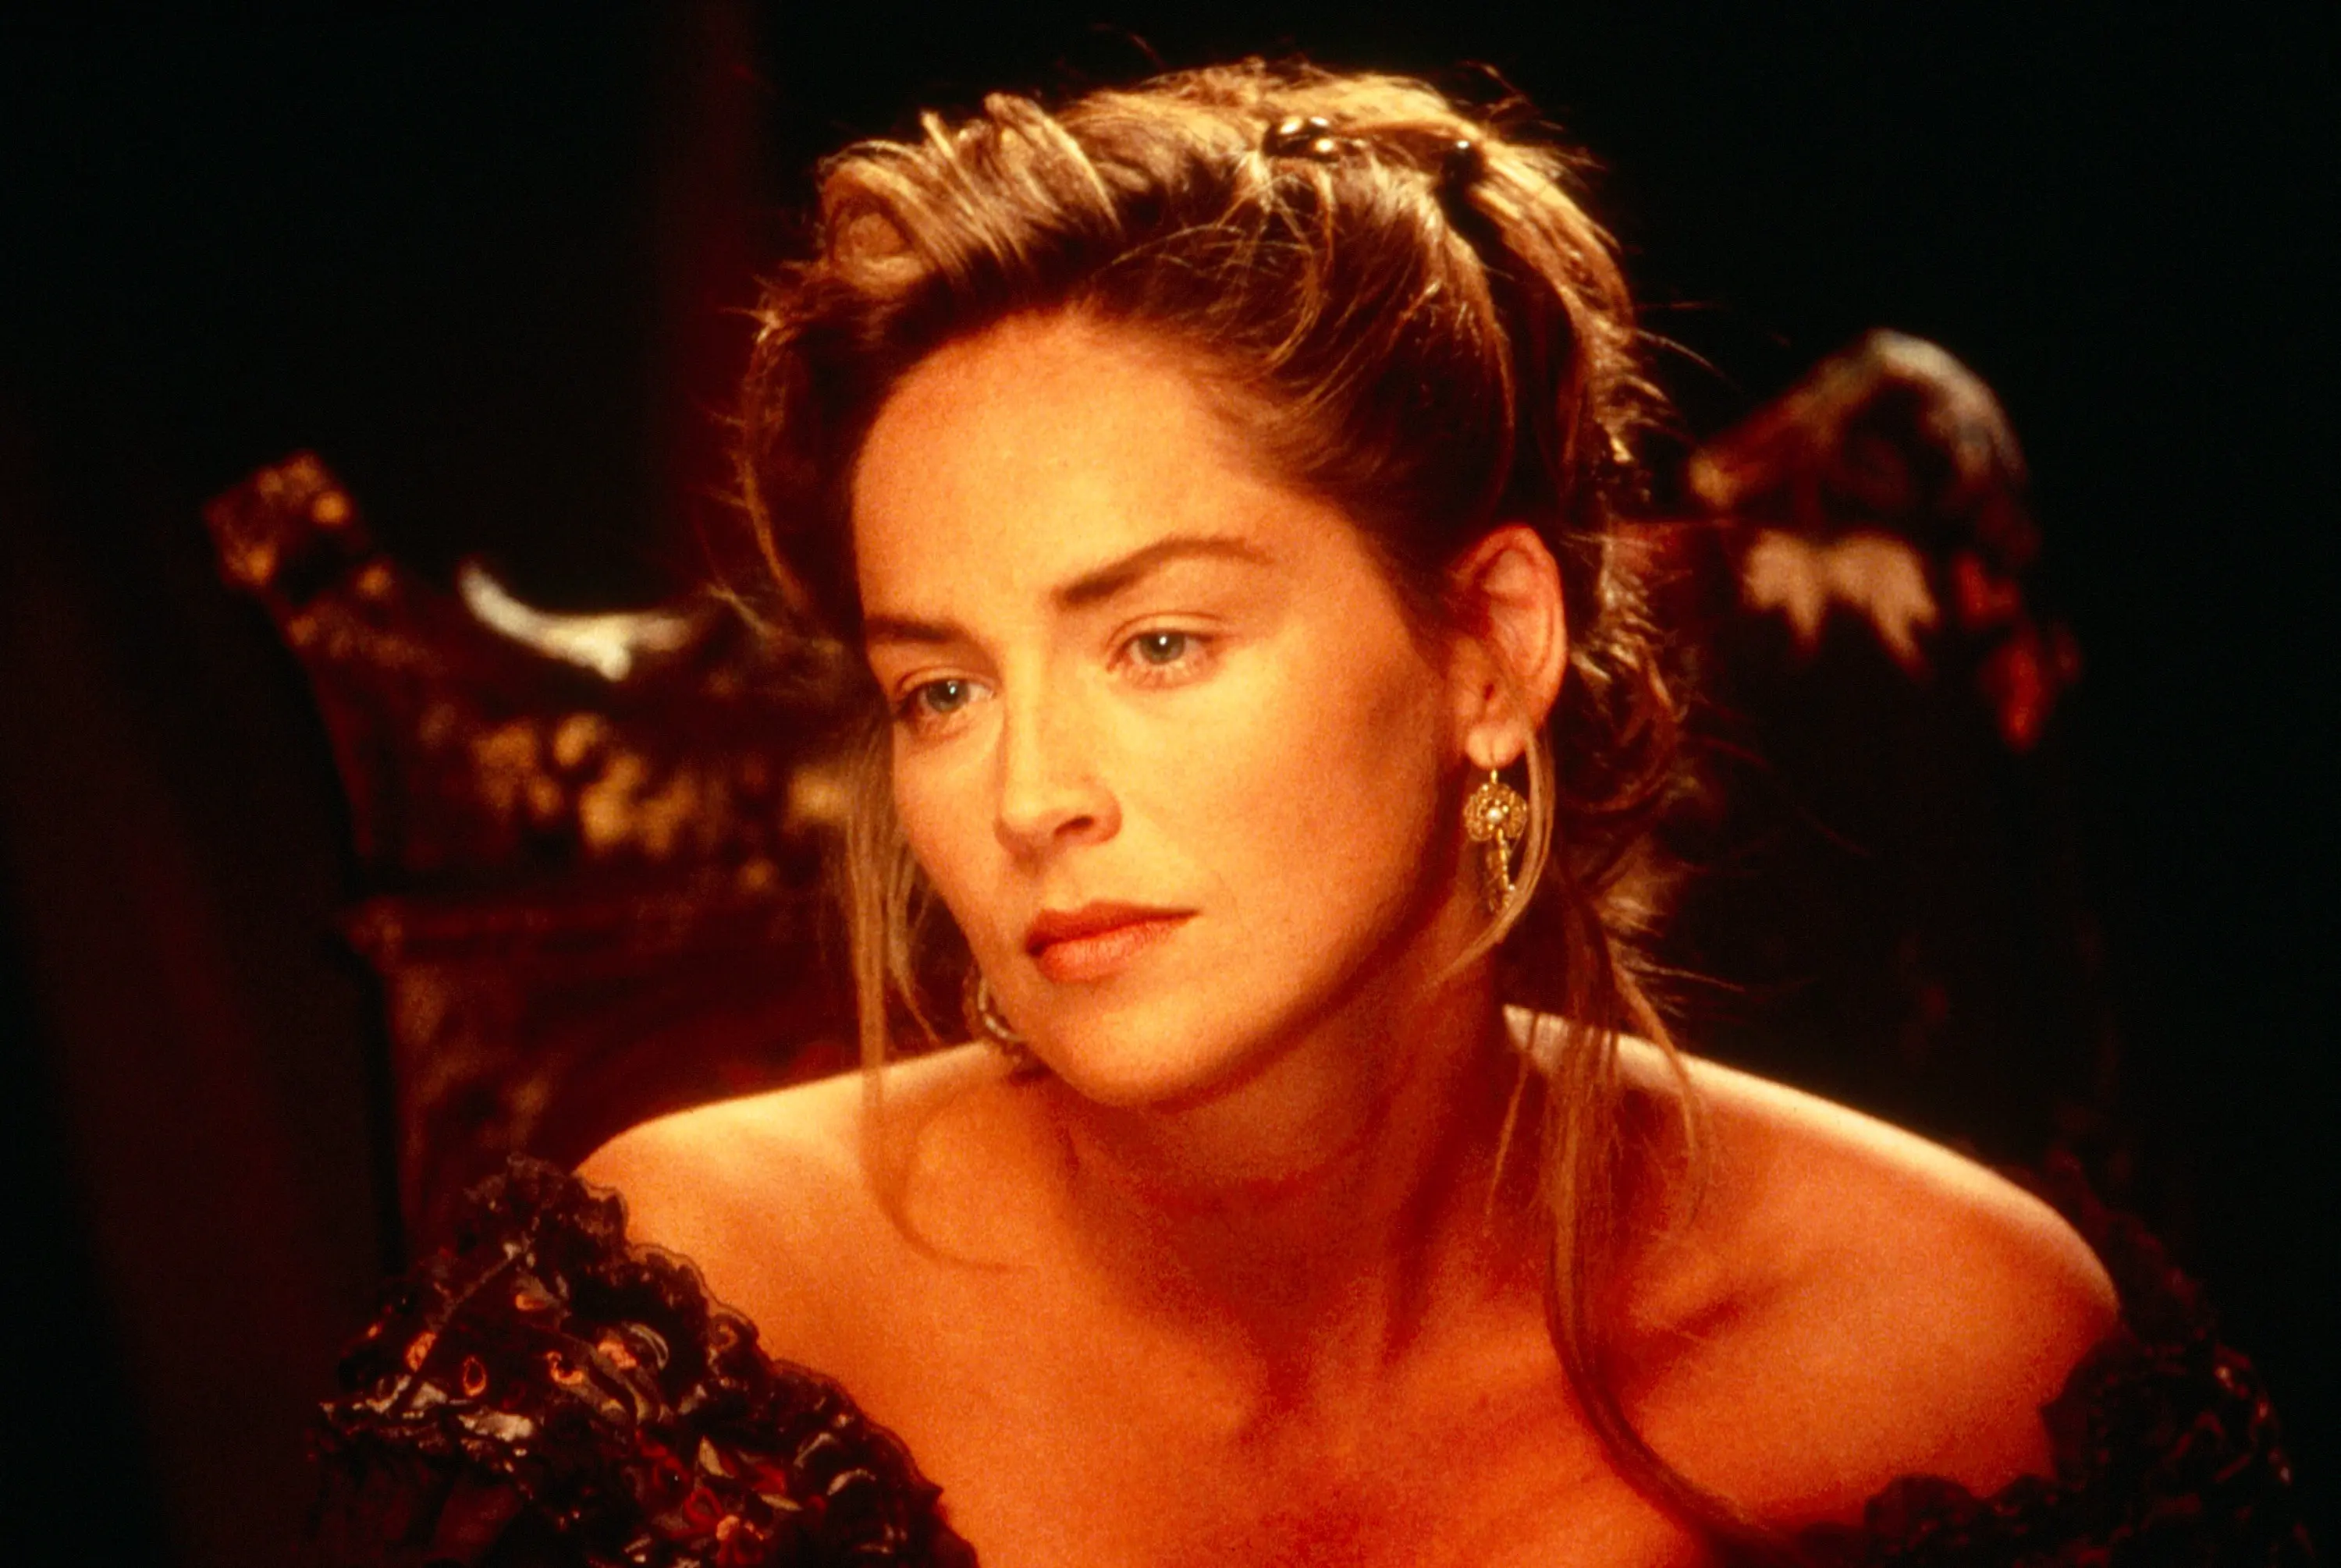 THE QUICK AND THE DEAD, Sharon Stone, 1995